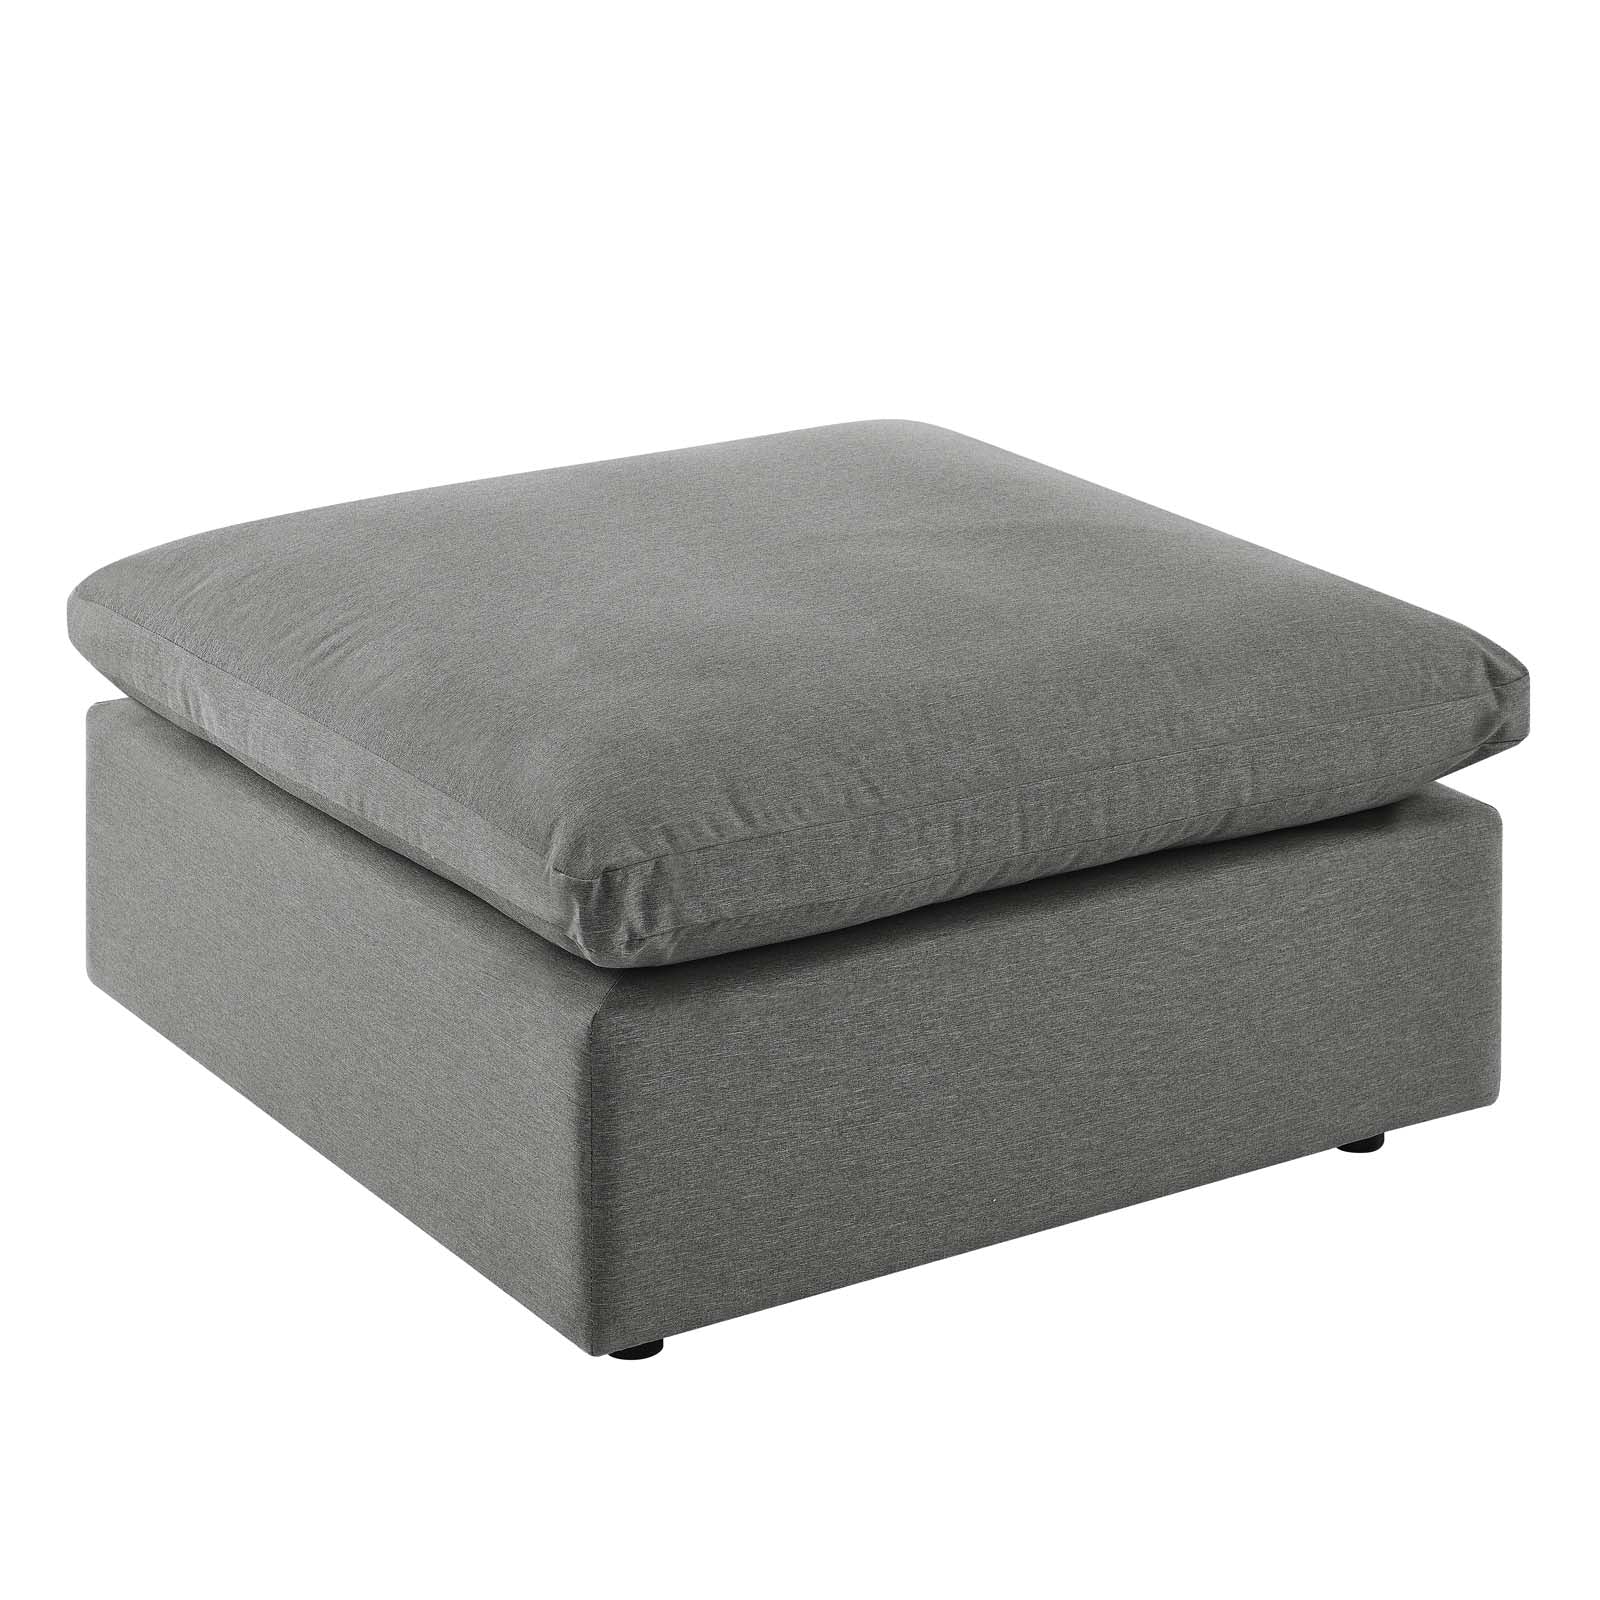 Modway Outdoor Ottomans - Commix Overstuffed Outdoor Patio Ottoman Charcoal